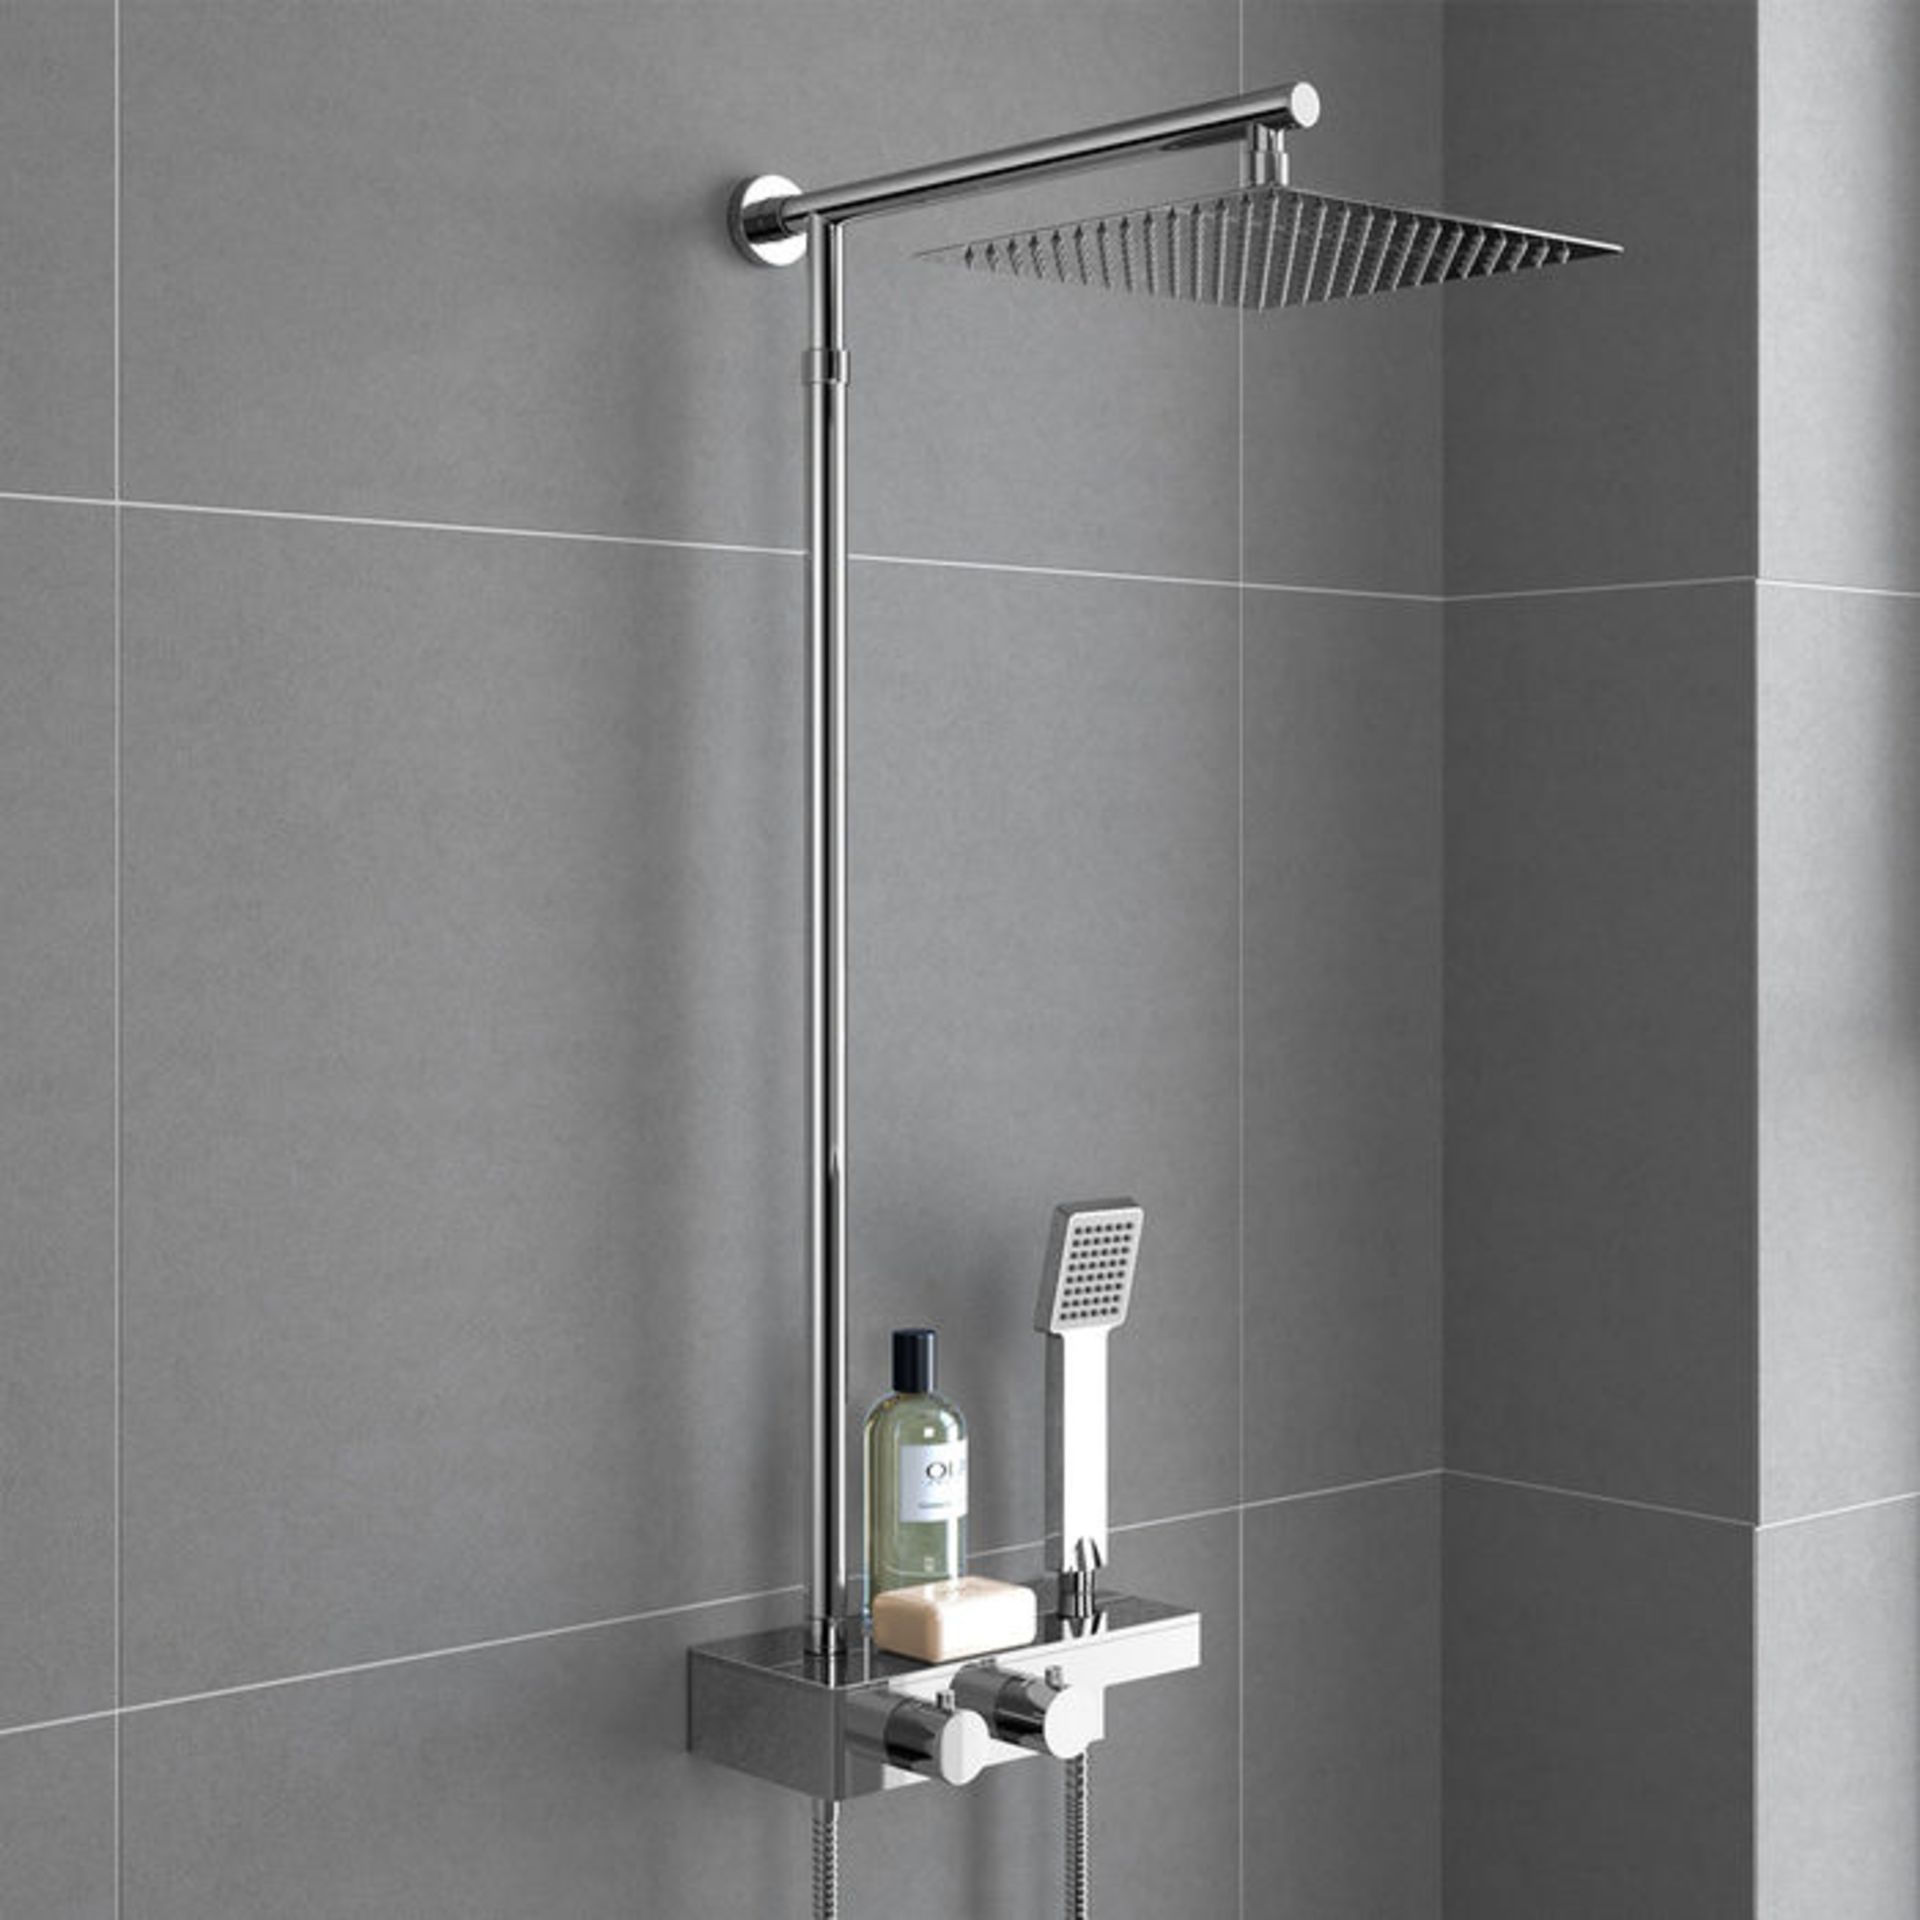 (Y157) Square Exposed Thermostatic Shower Shelf, Kit & Large Head. RRP £349.99. Style meets function - Image 2 of 6